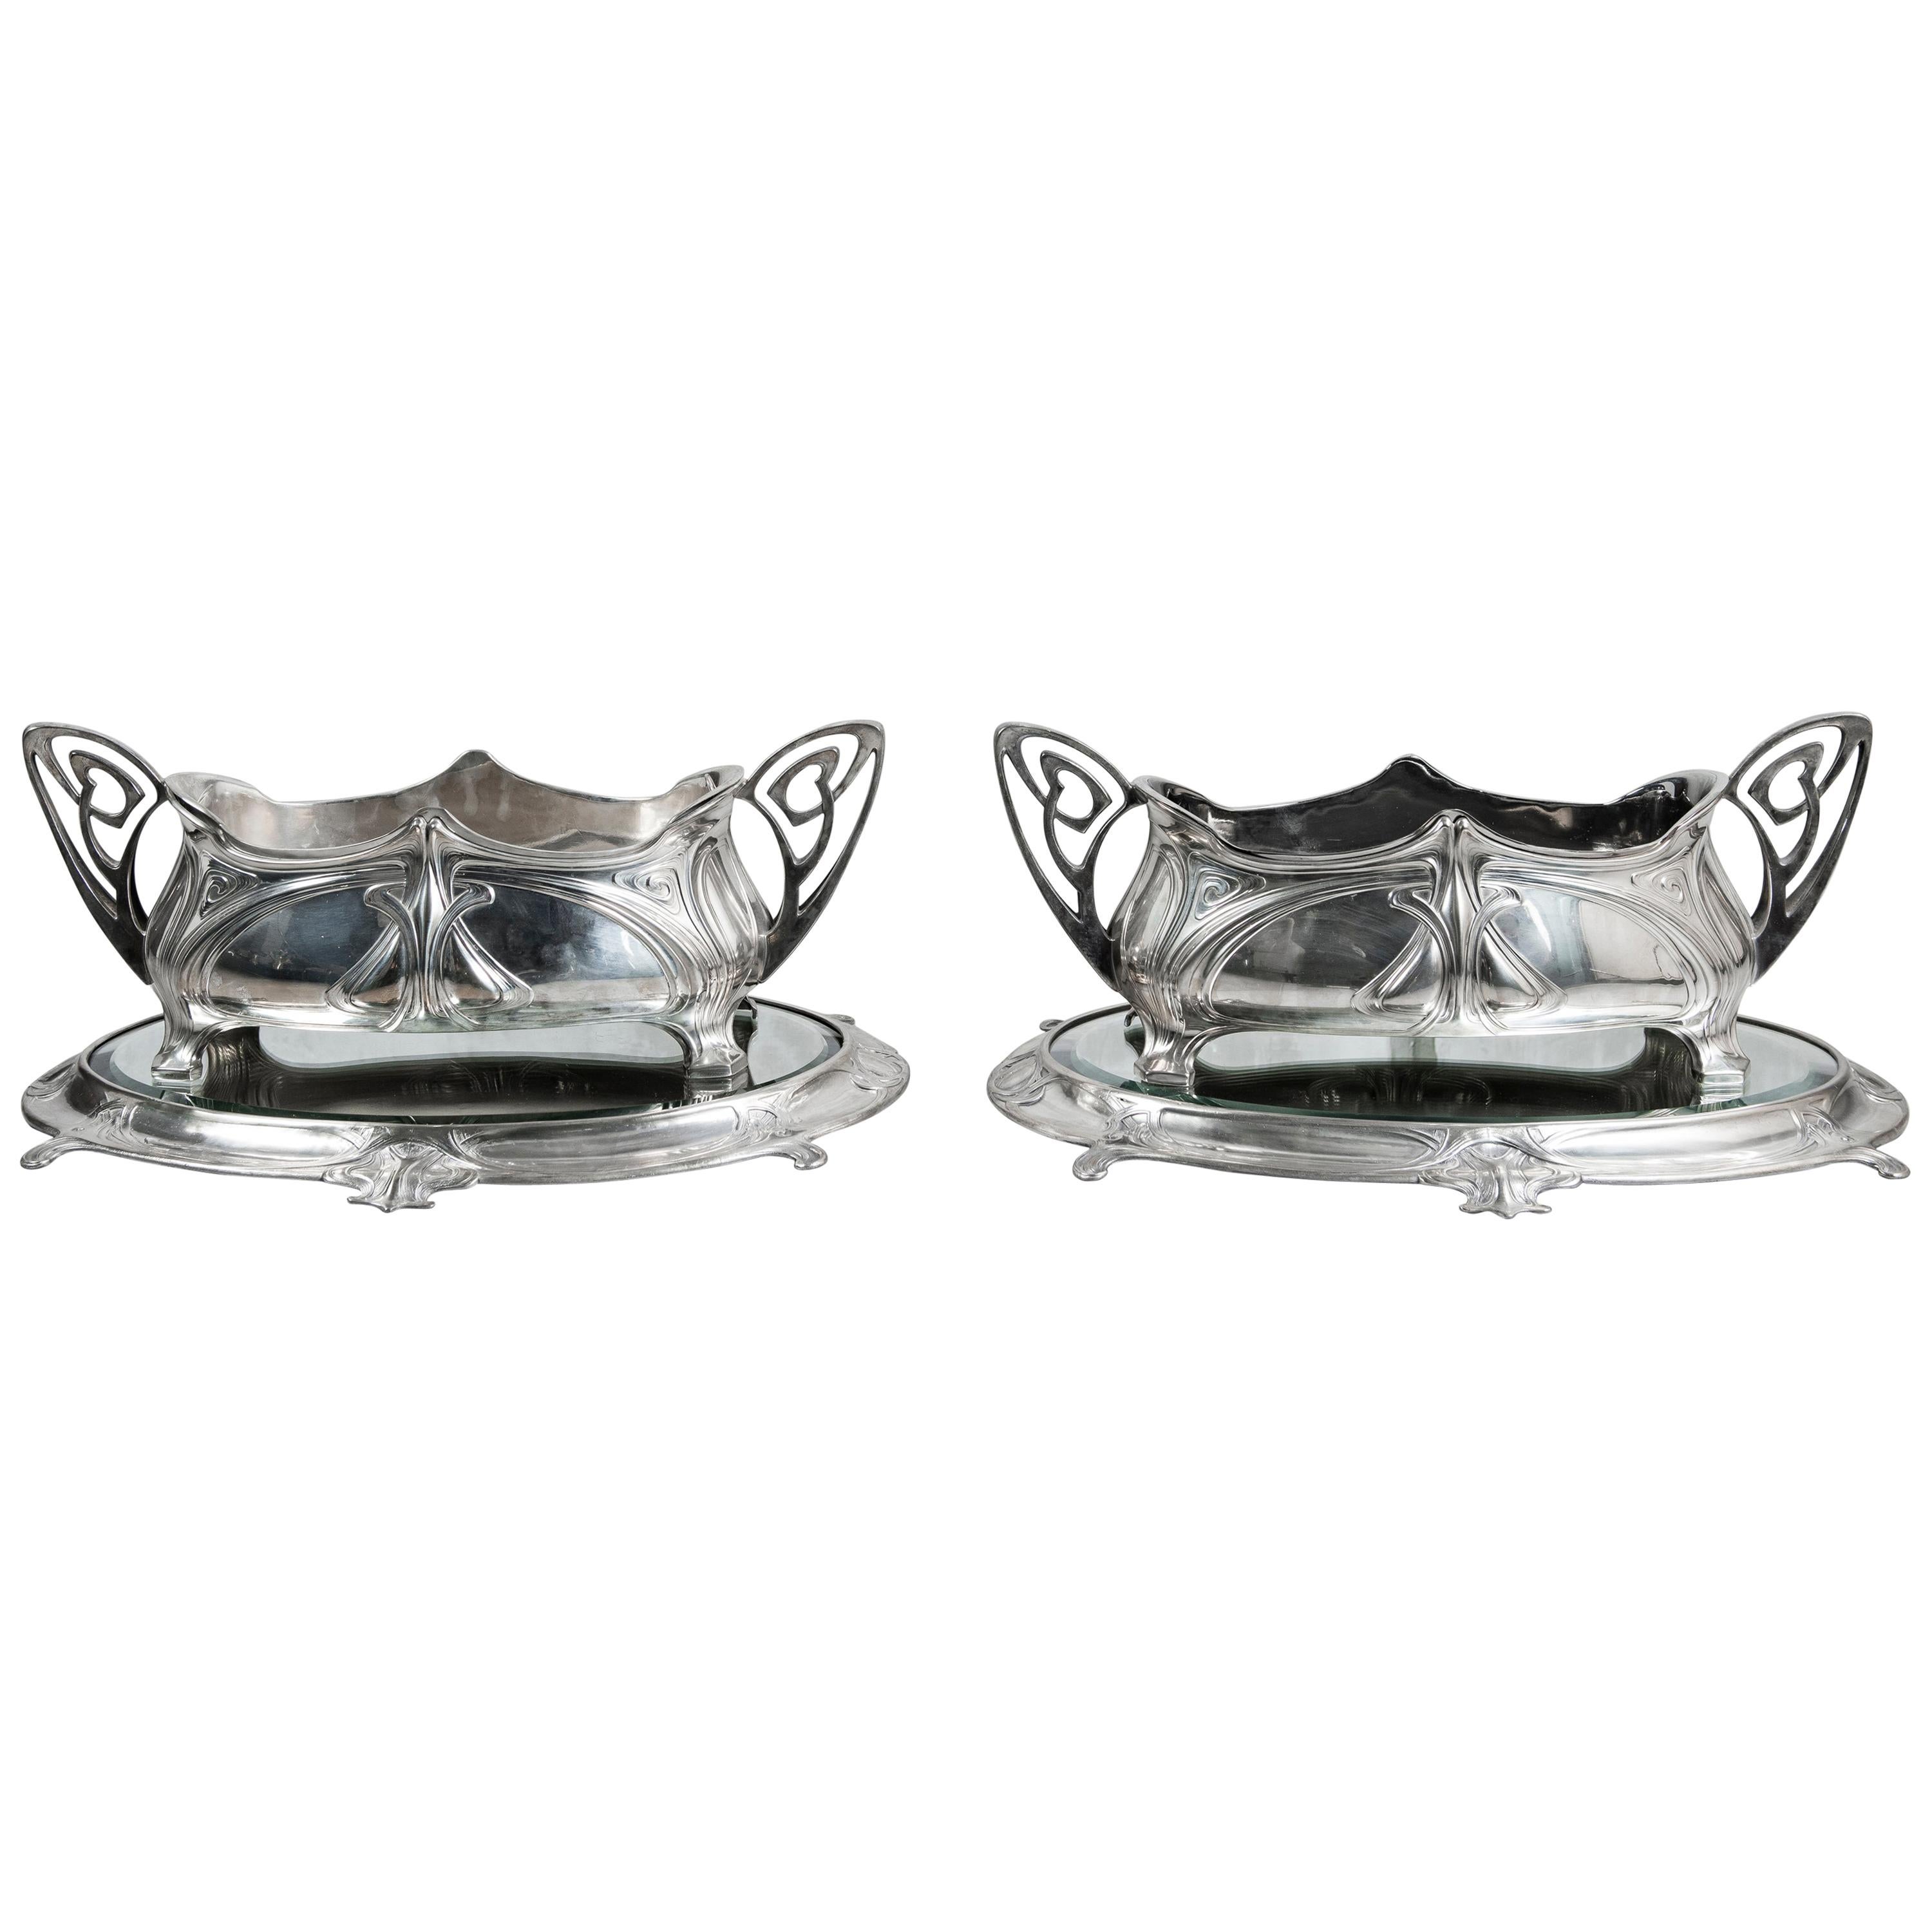 Pair of W.M.F. Silver Plate Jardiniere with Mirror Plateau, Jugendstil Style